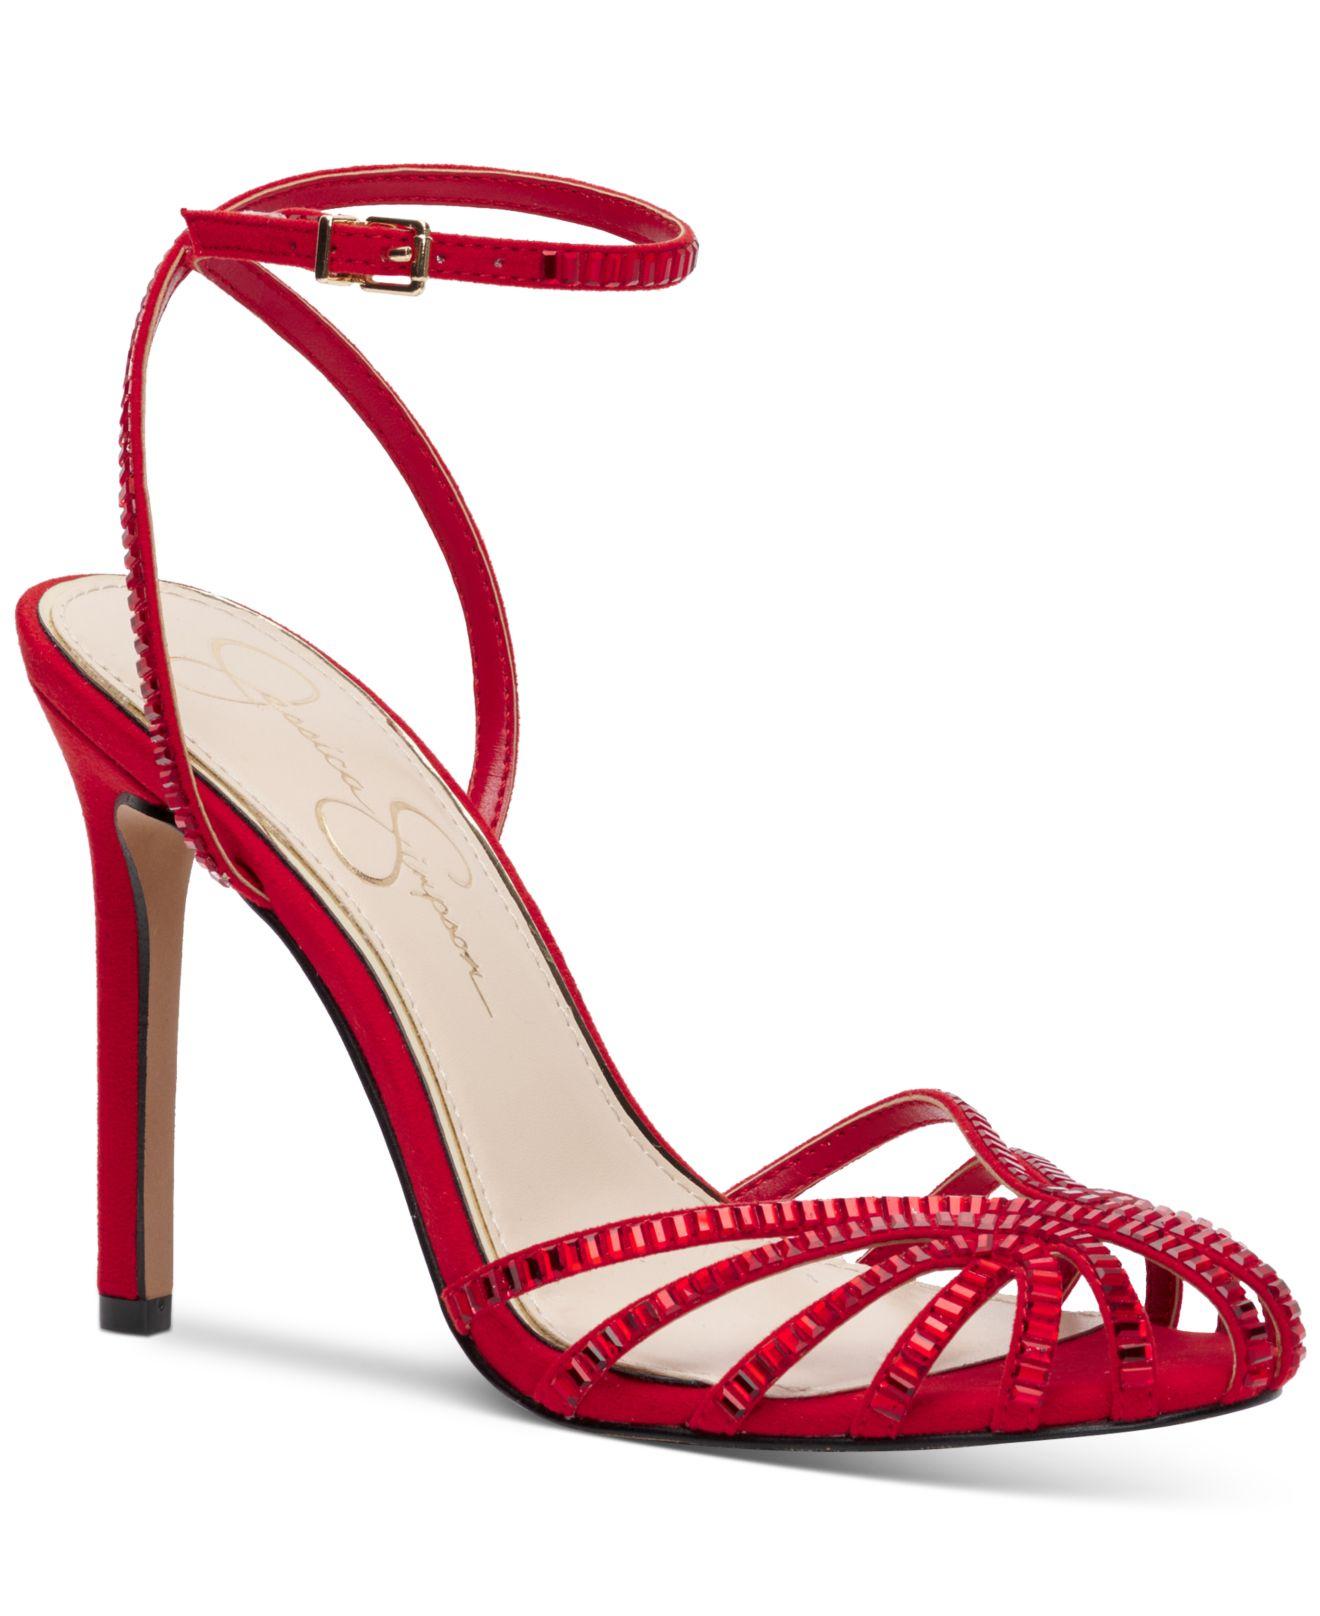 JM LOOKS Strappy Heels for Women Red Chunky Heels High Heeled Sandals with  Lace Up Fahsion